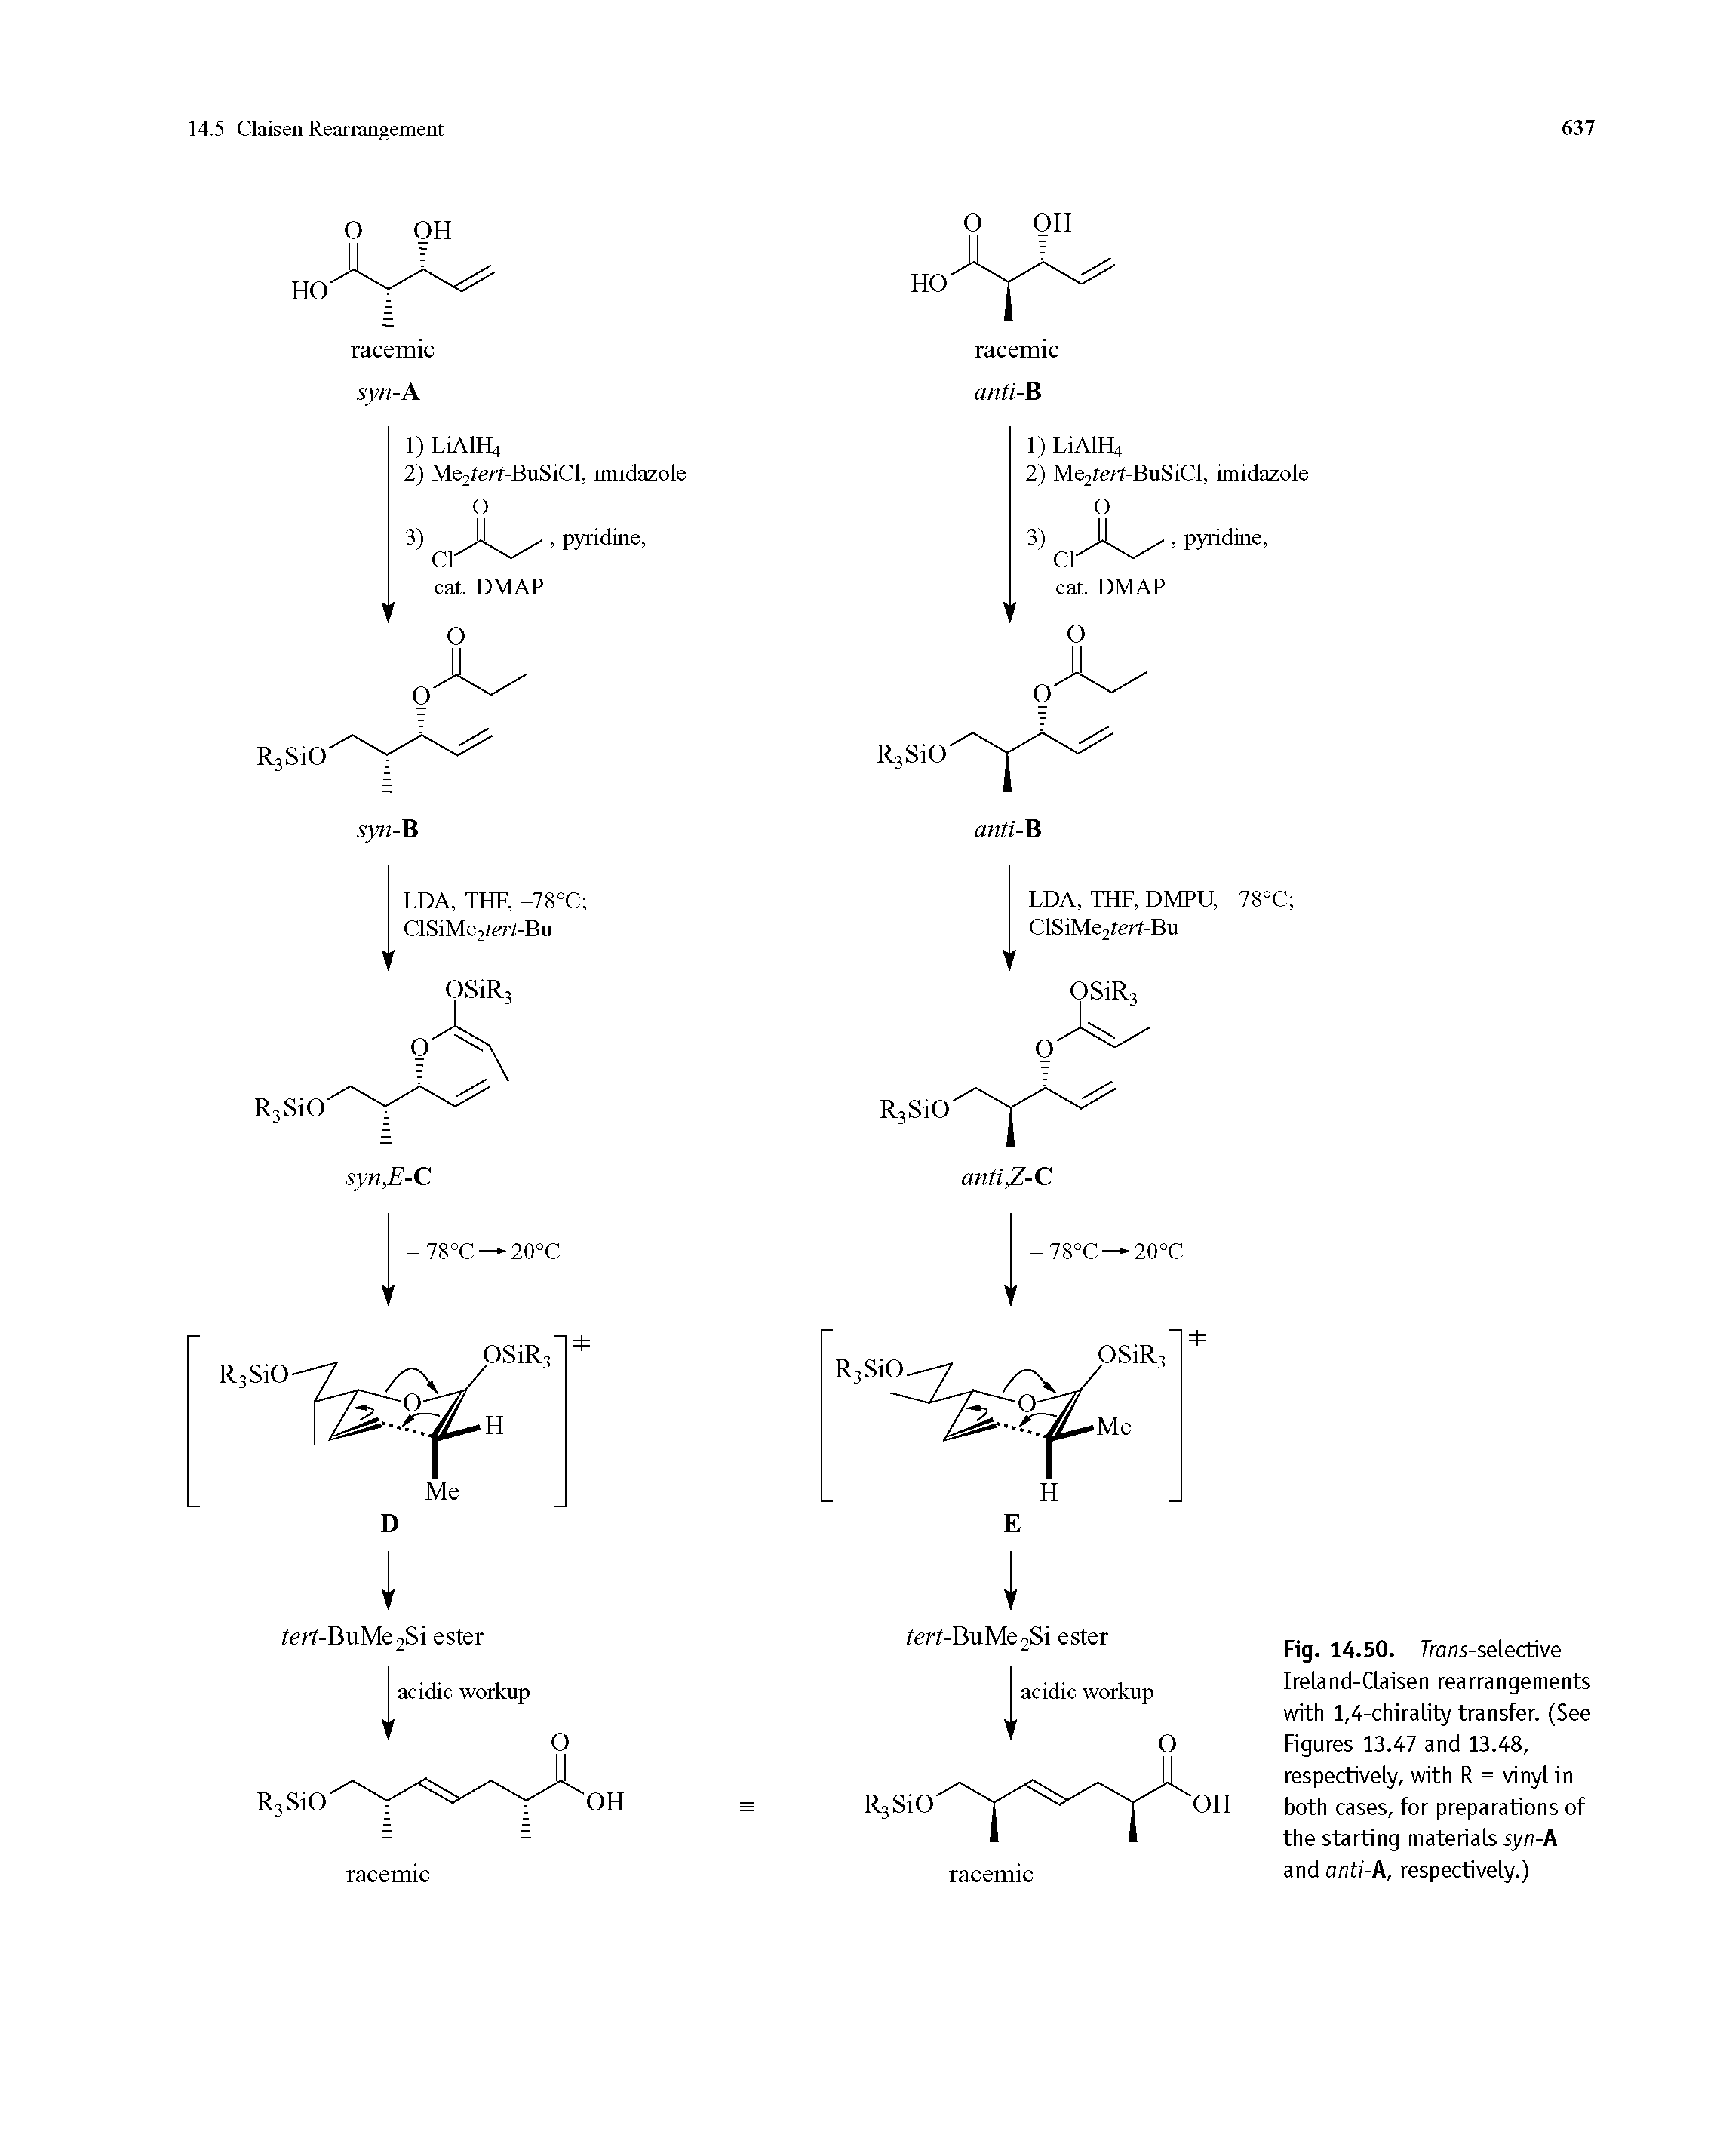 Fig. 14.50. Frans-selective Ireland-Claisen rearrangements with 1,4-chirality transfer. (See Figures 13.47 and 13.48, respectively, with R = vinyl in both cases, for preparations of the starting materials syn-A and anti-k, respectively.)...